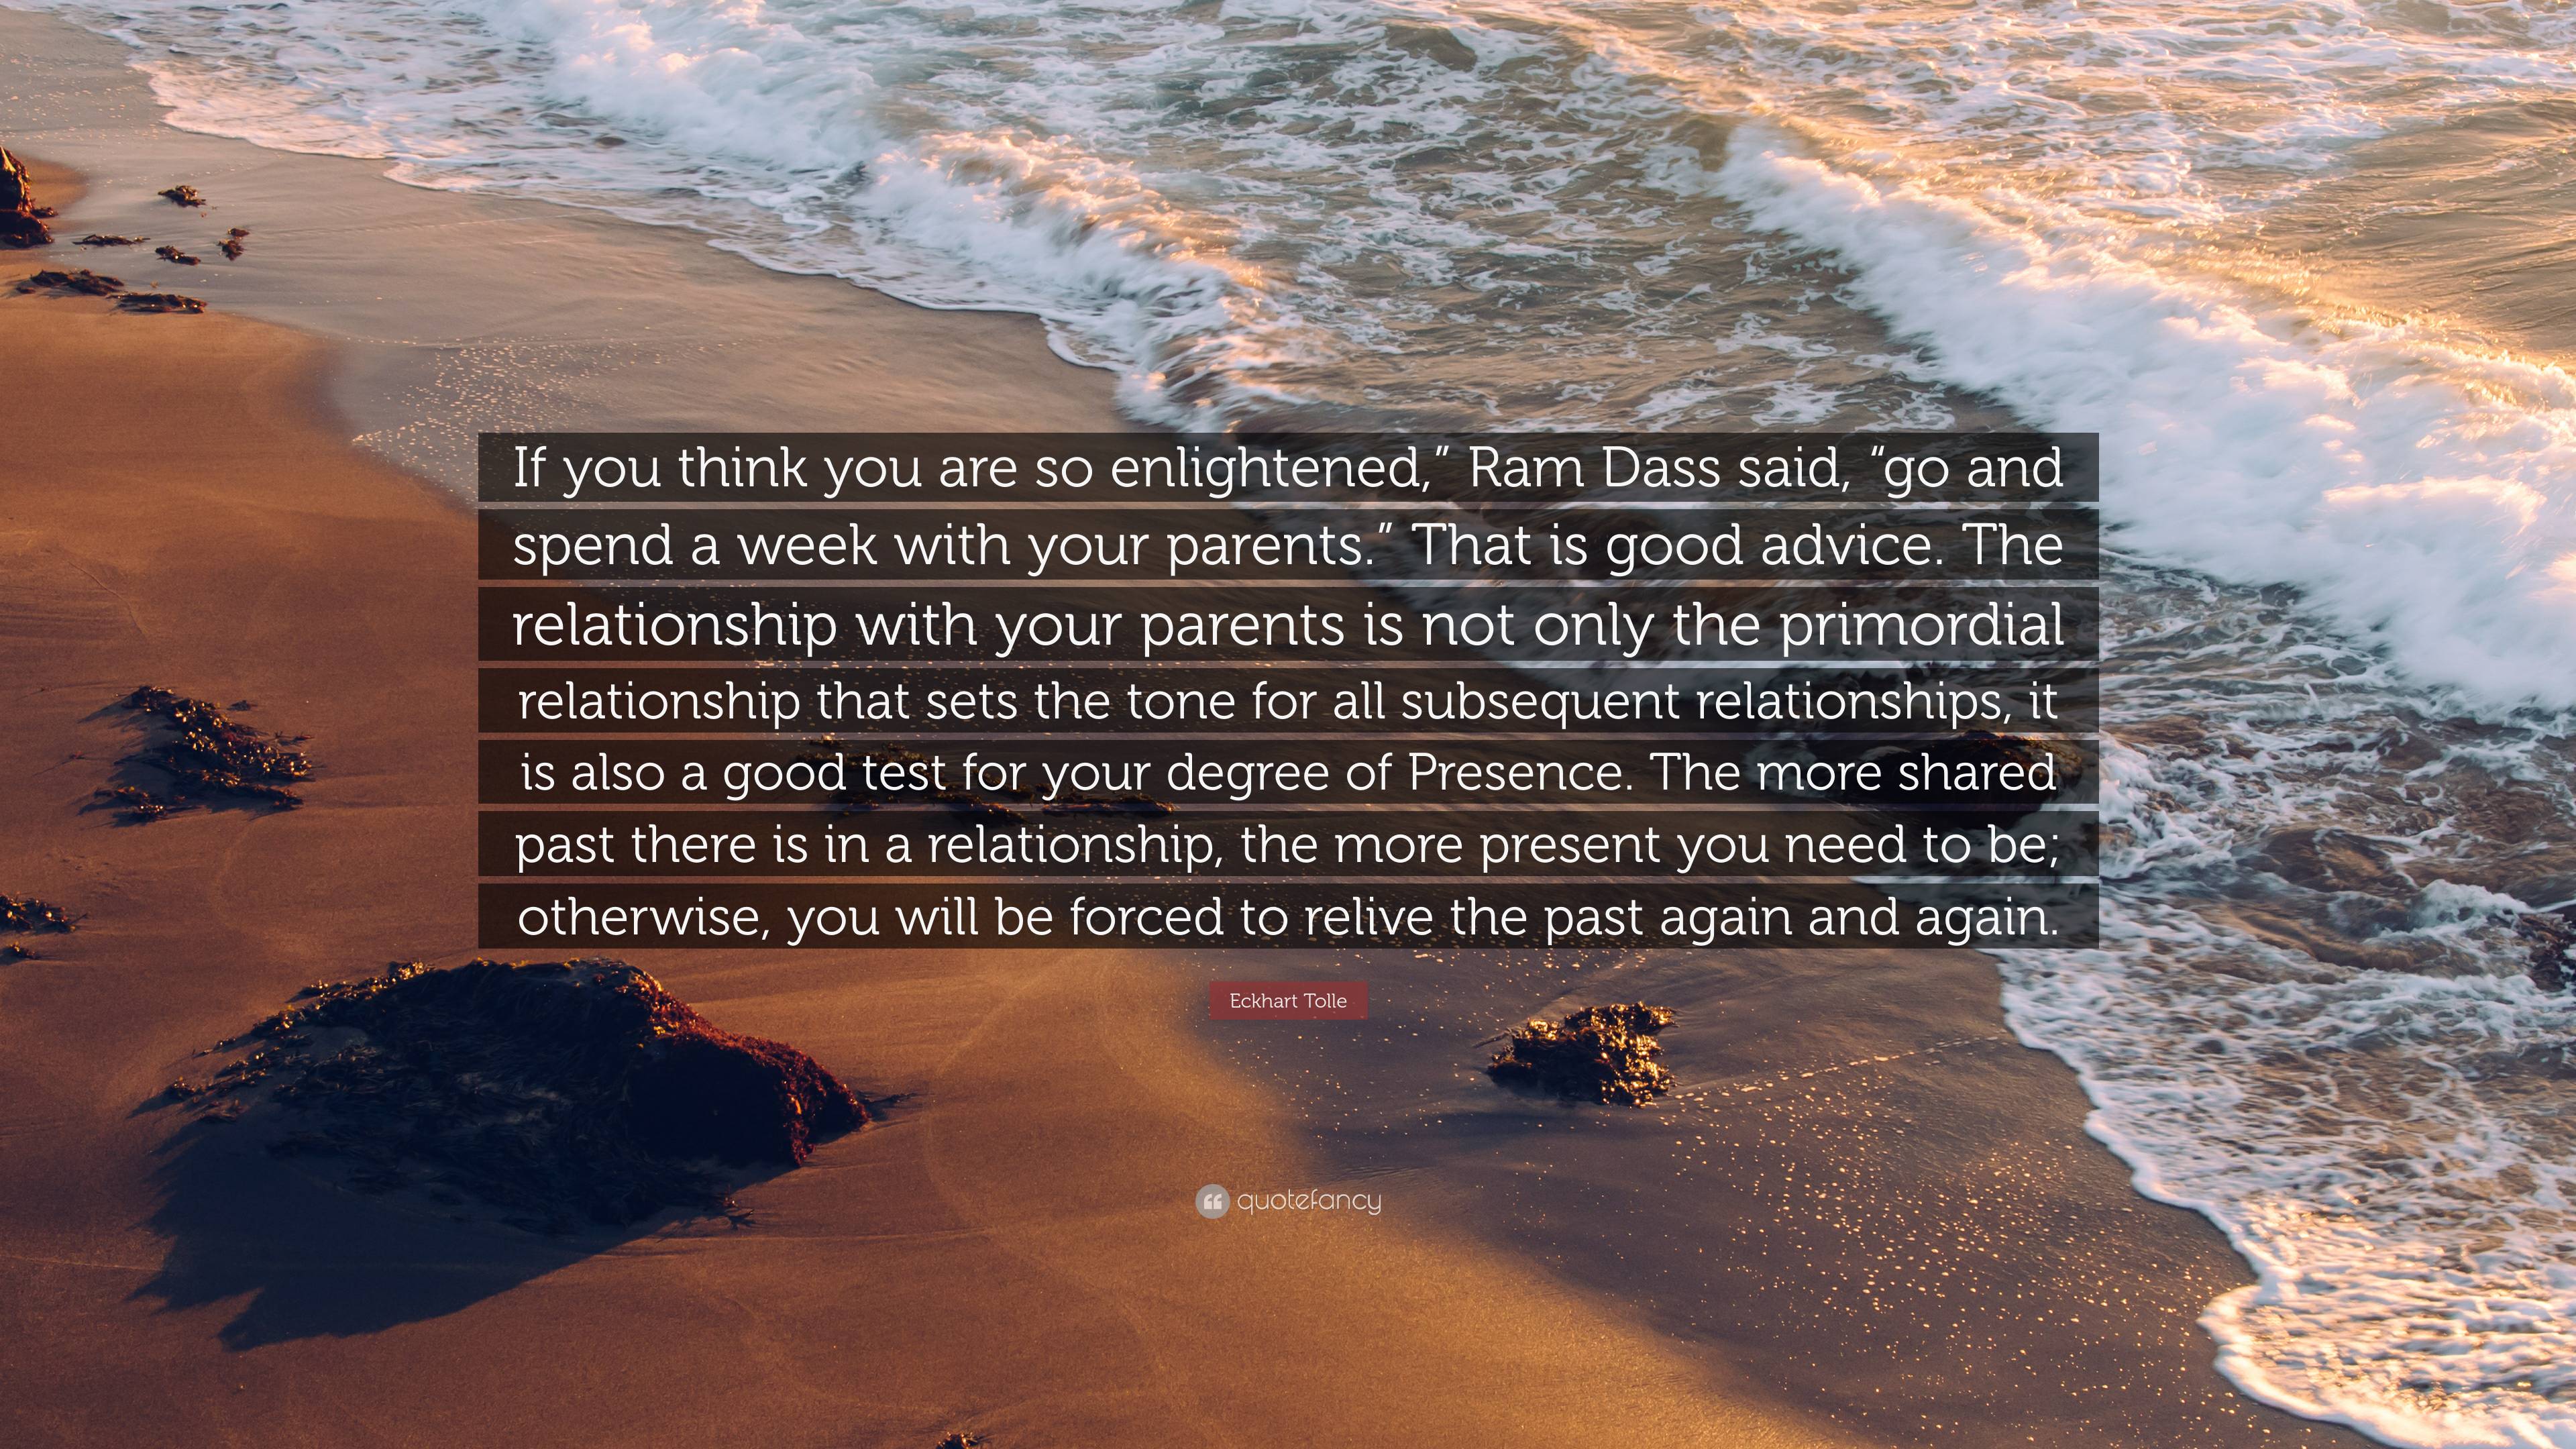 Eckhart Quote: “If you think you are so enlightened,” Ram Dass said, “go and spend a week with your parents.” That good r...”